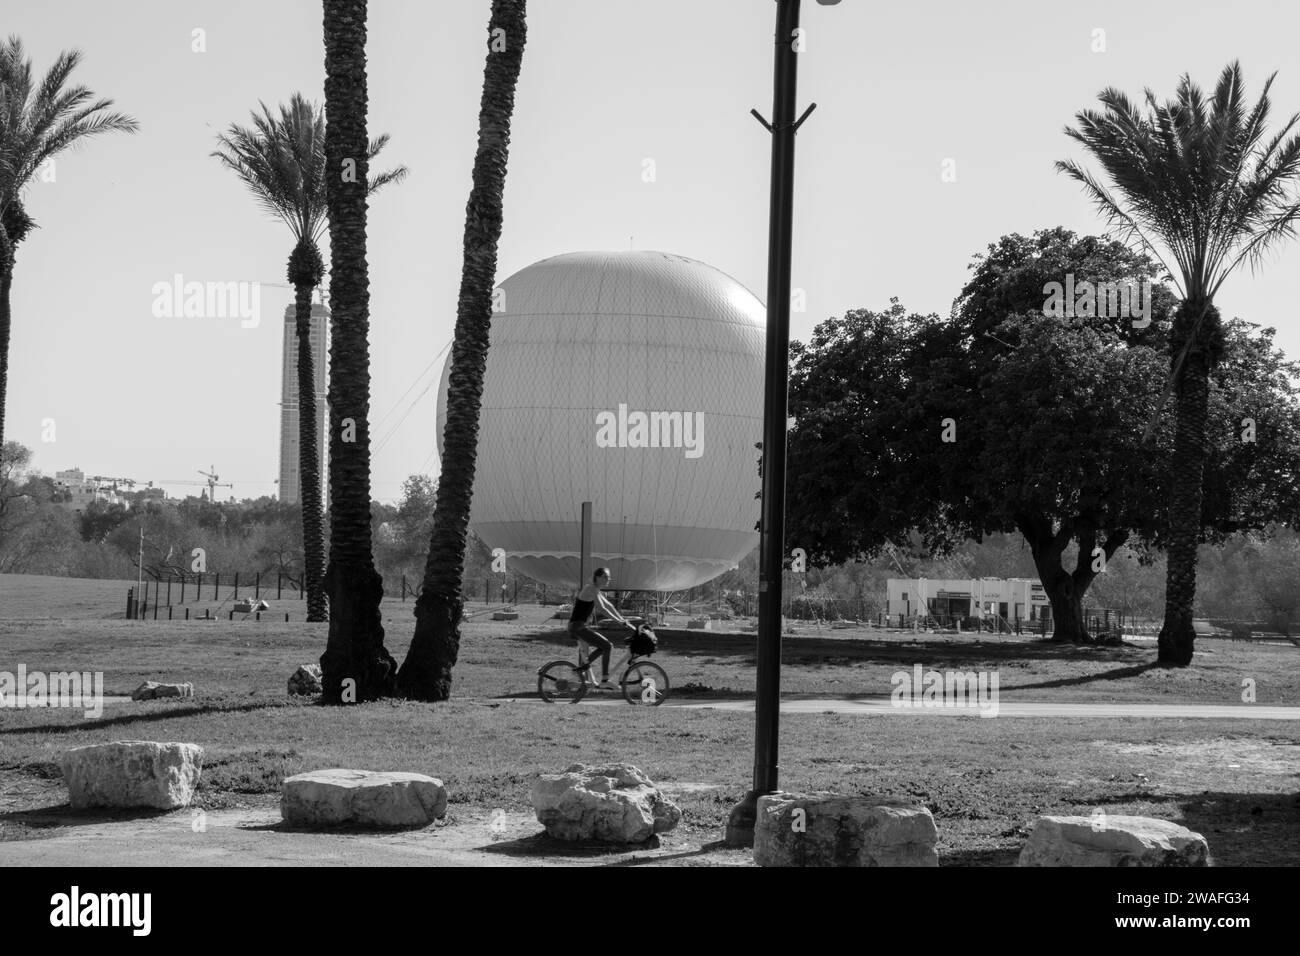 A cyclist rides on a bike path in a public park on a hot summer day. In the background a hot air balloon and trees of various types including palms Stock Photo